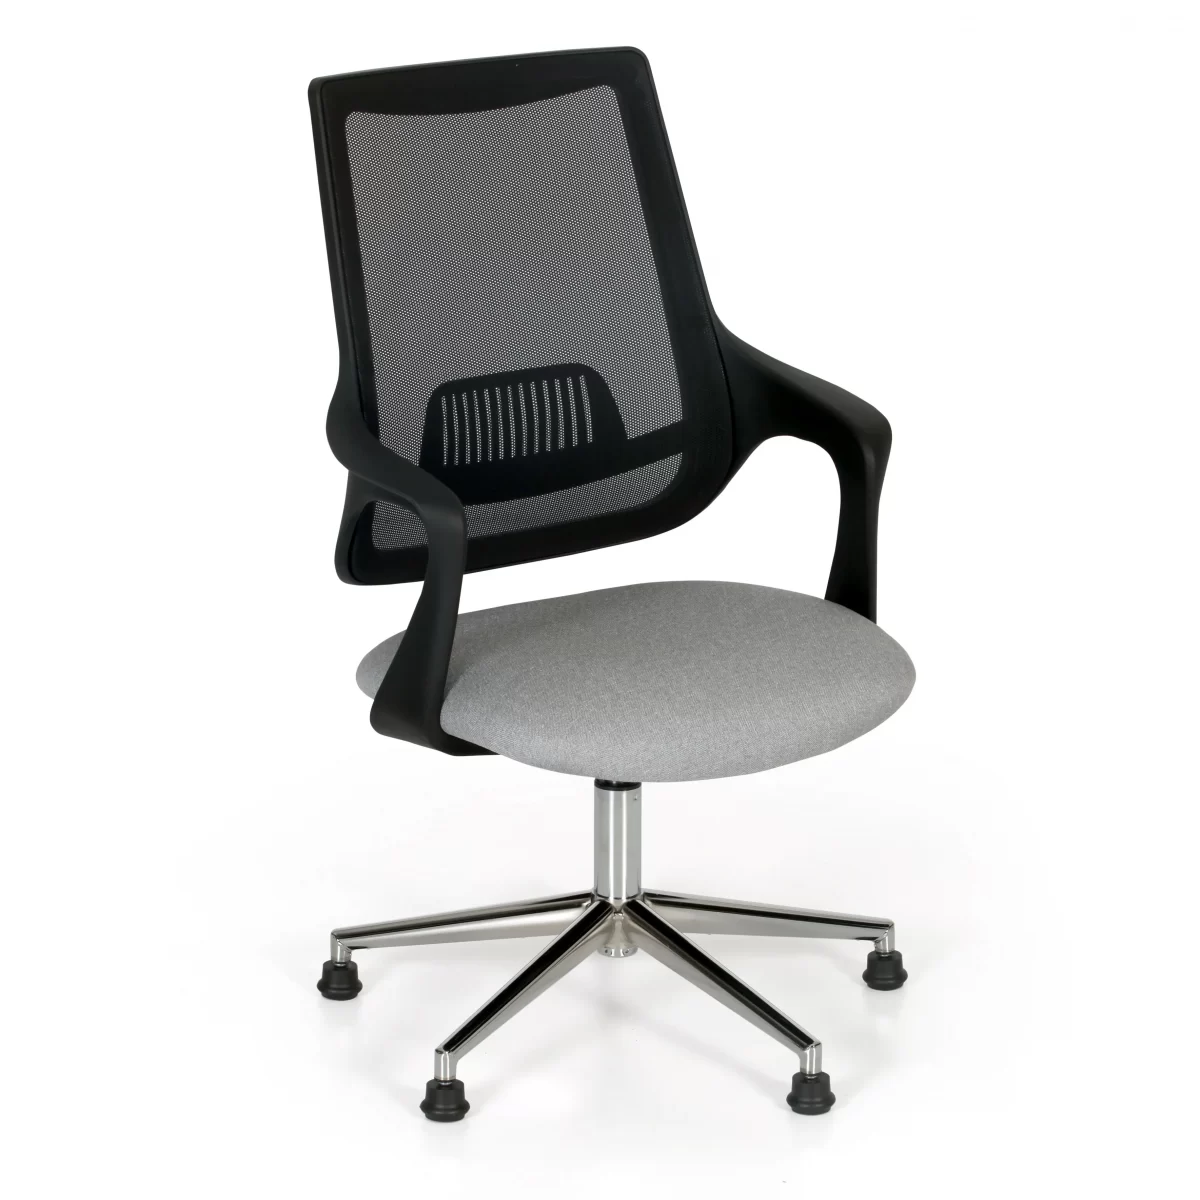 Thomas Ch Office Guest Chair Chrome Legs scaled